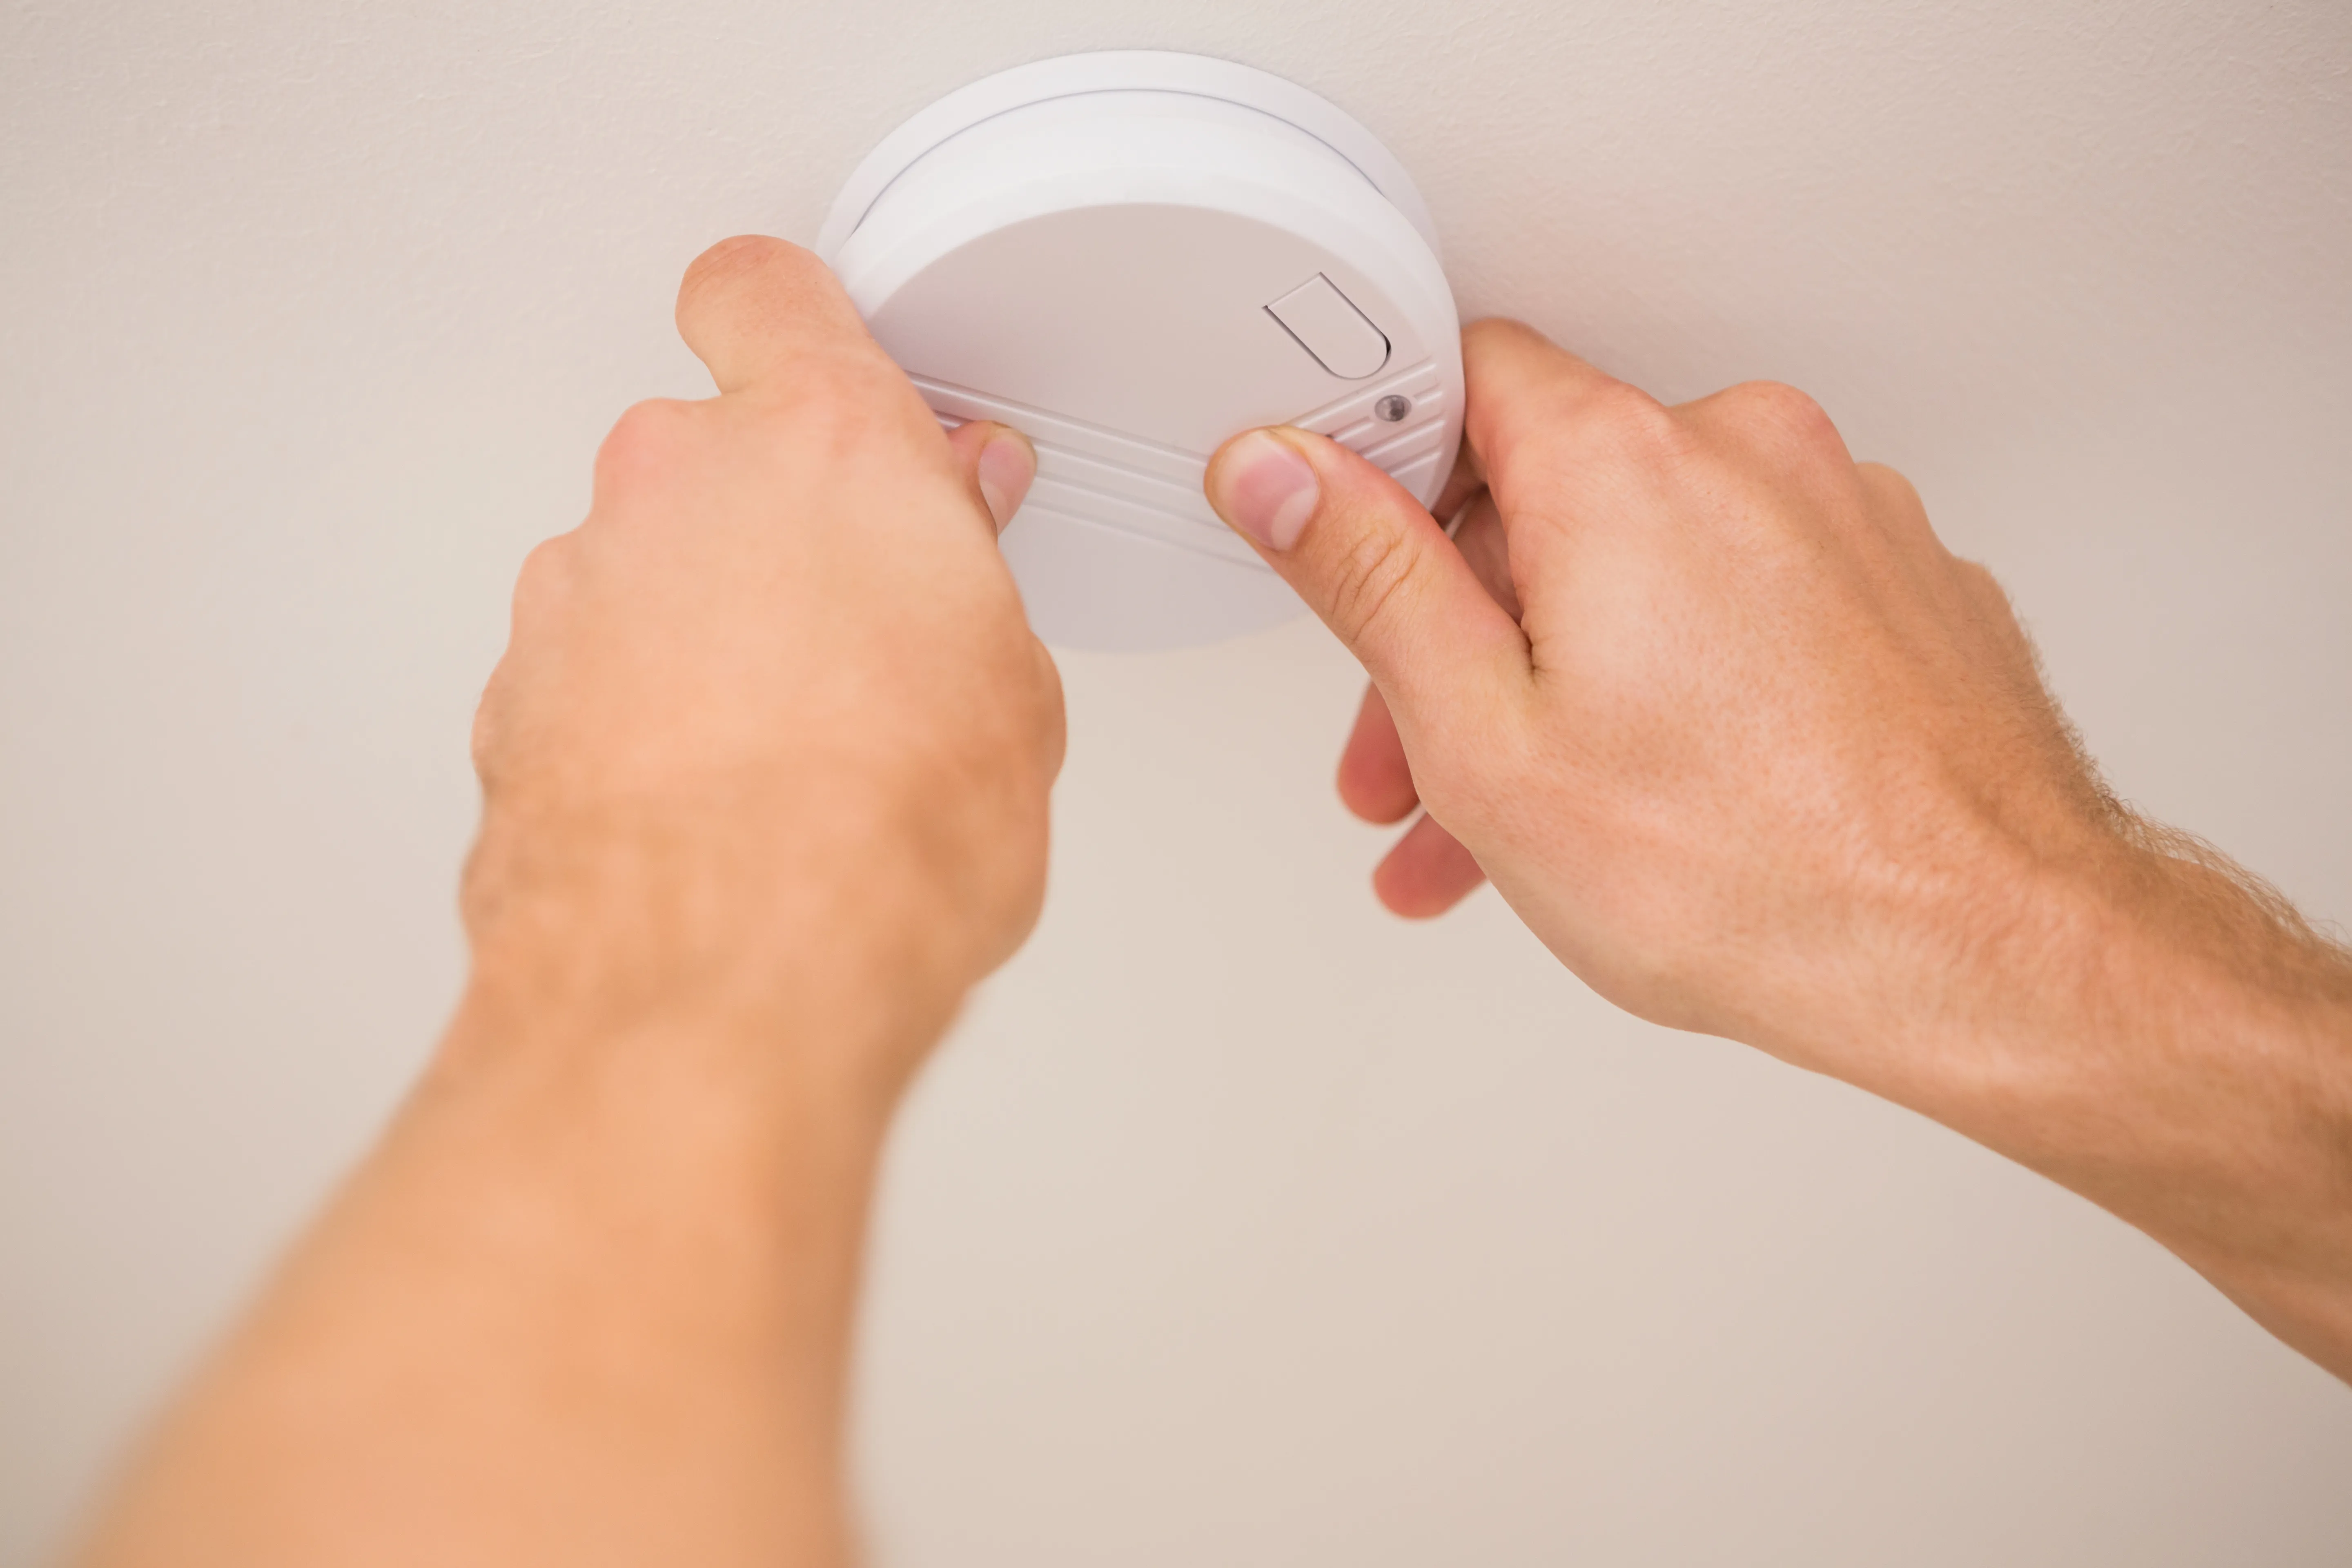 Test smoke alarms in safe location.